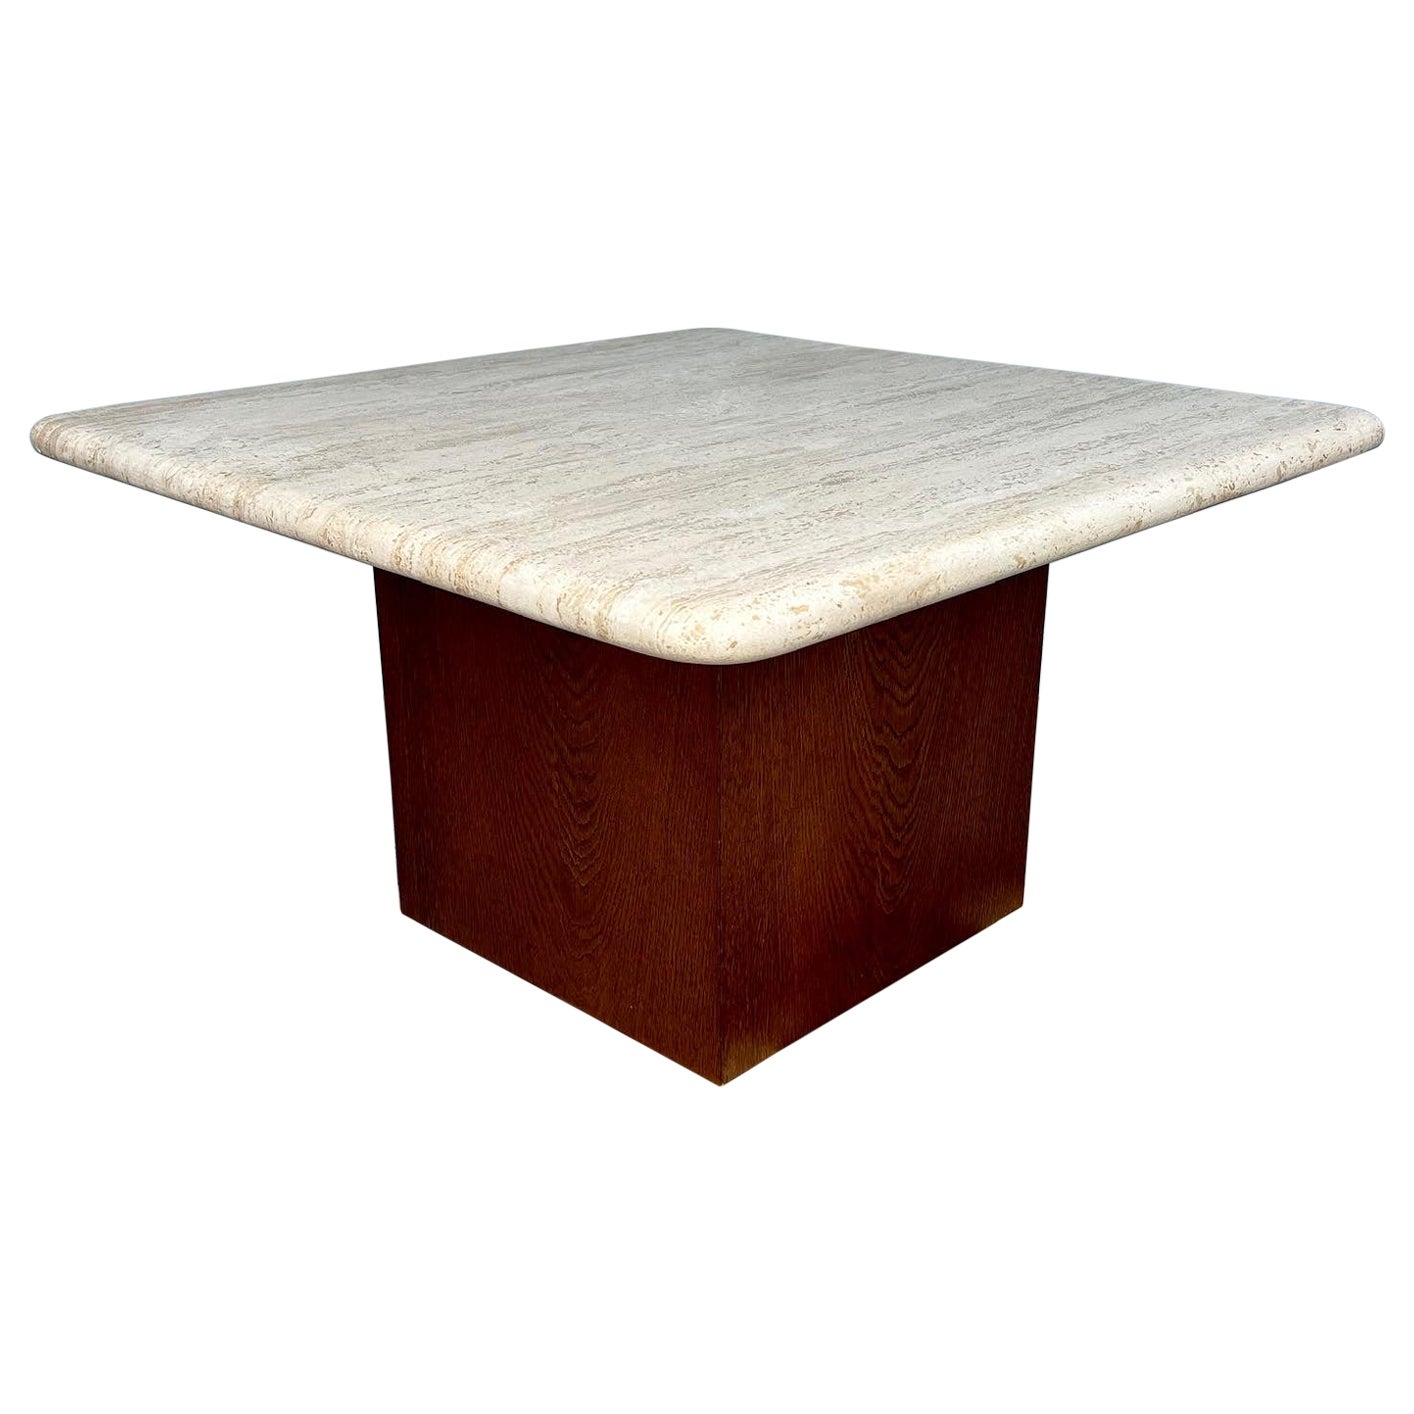 Travertine and Wood Petite Coffee Table